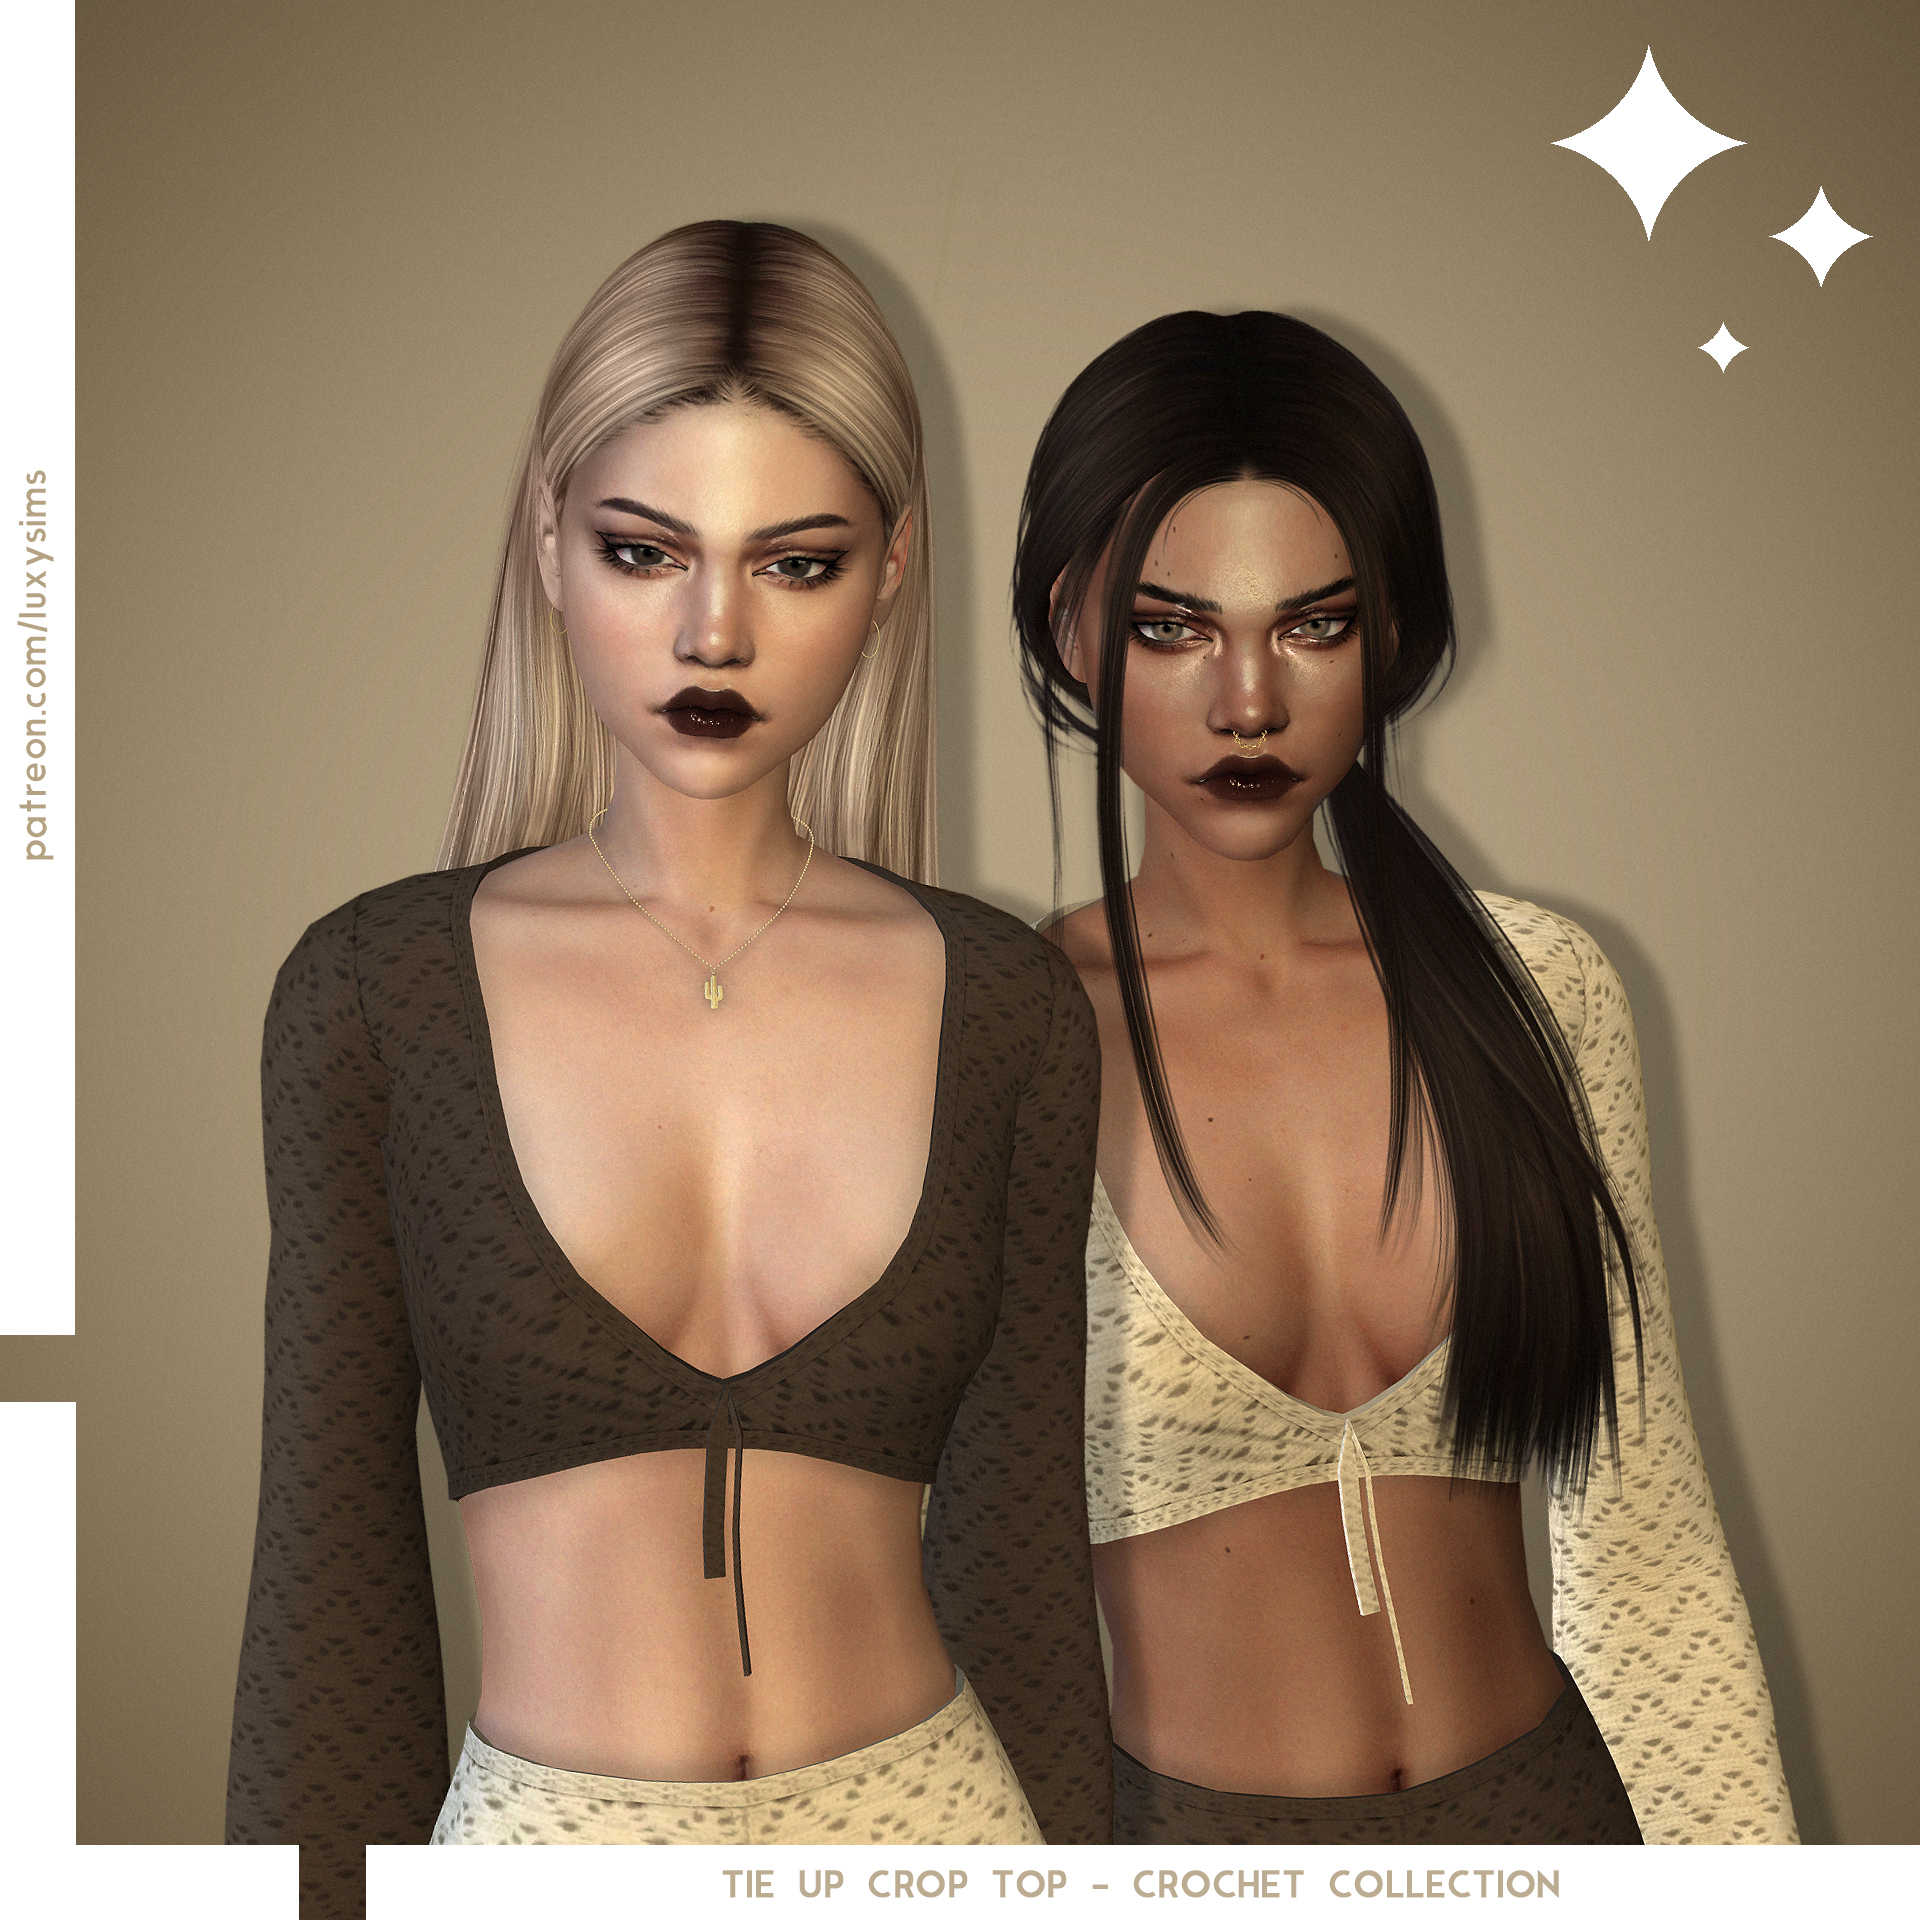 Tie Up Crop Top - Crochet Collection project avatar